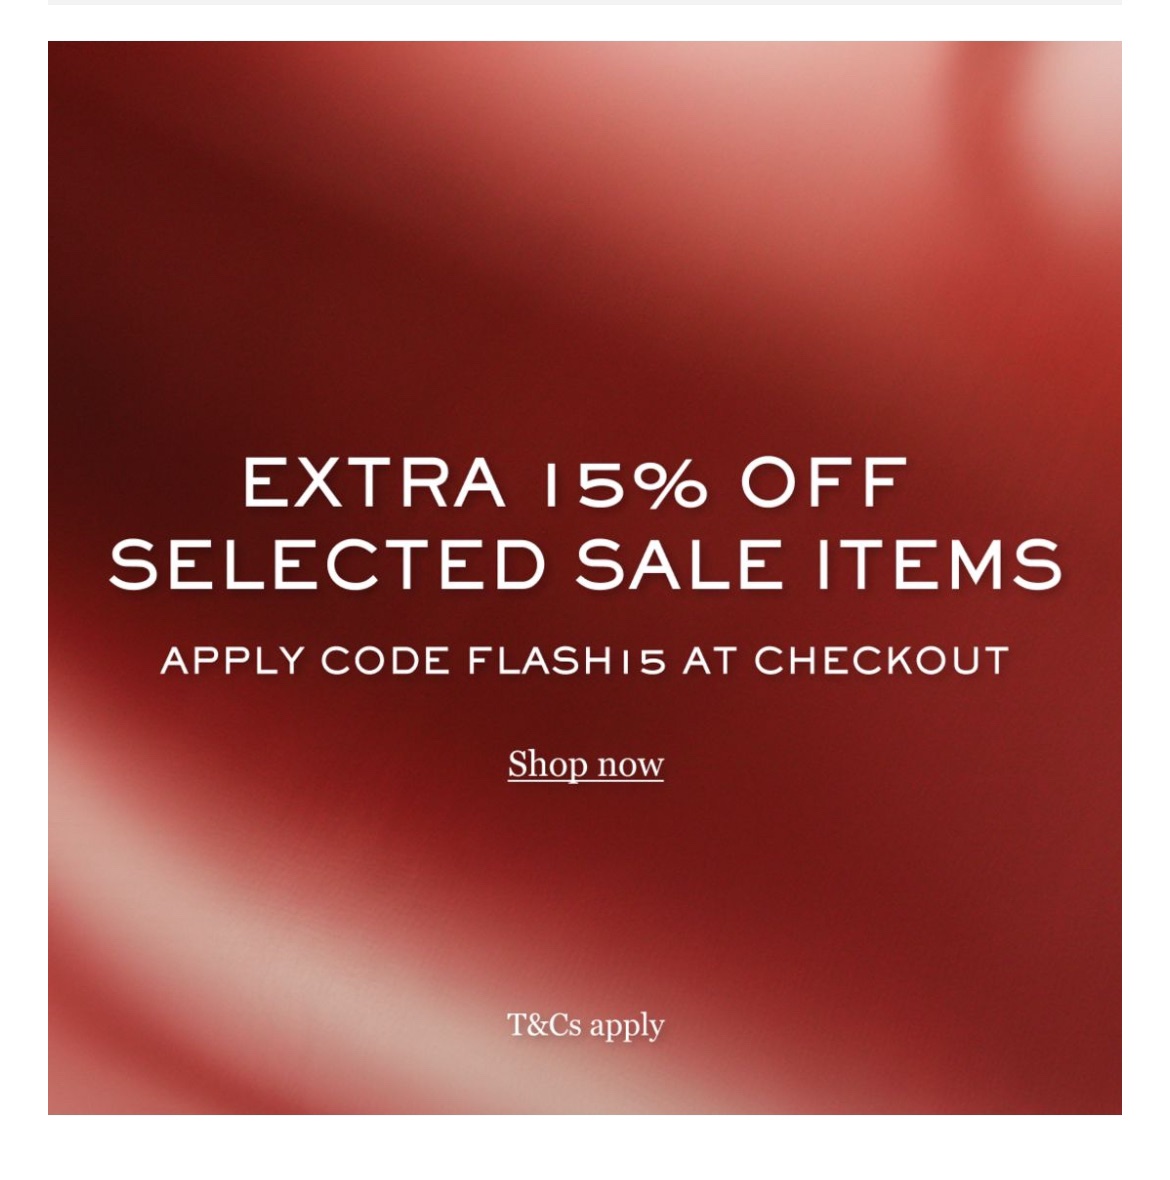 EXTRA 15% OFF SELECTED SALE ITEMS
APPLY CODE FLASHI5 AT CHECKOUT